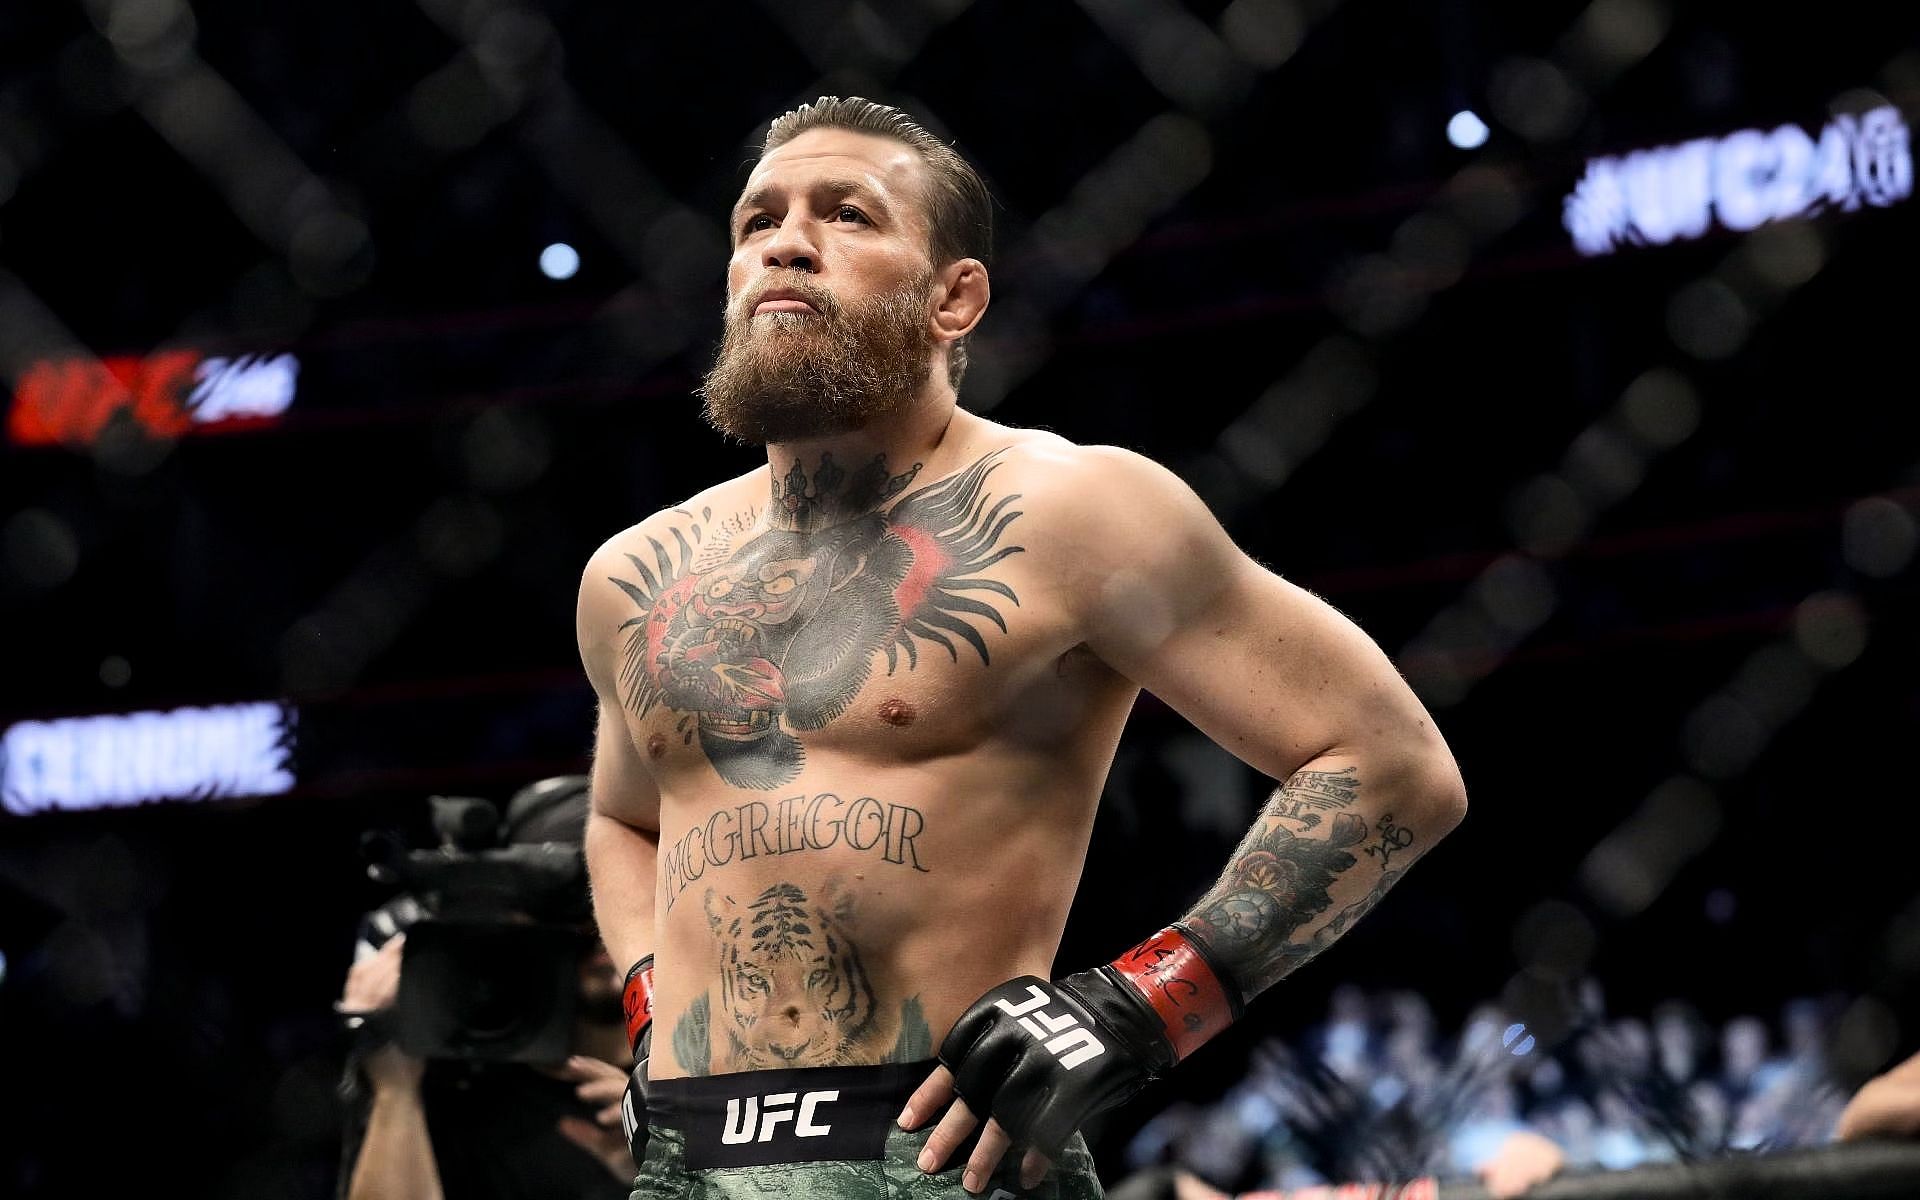 Conor McGregor (pictured) will return to the UFC now that his &quot;obligations&quot; have been completed, says Dana White [Image Courtesy: @GettyImages]